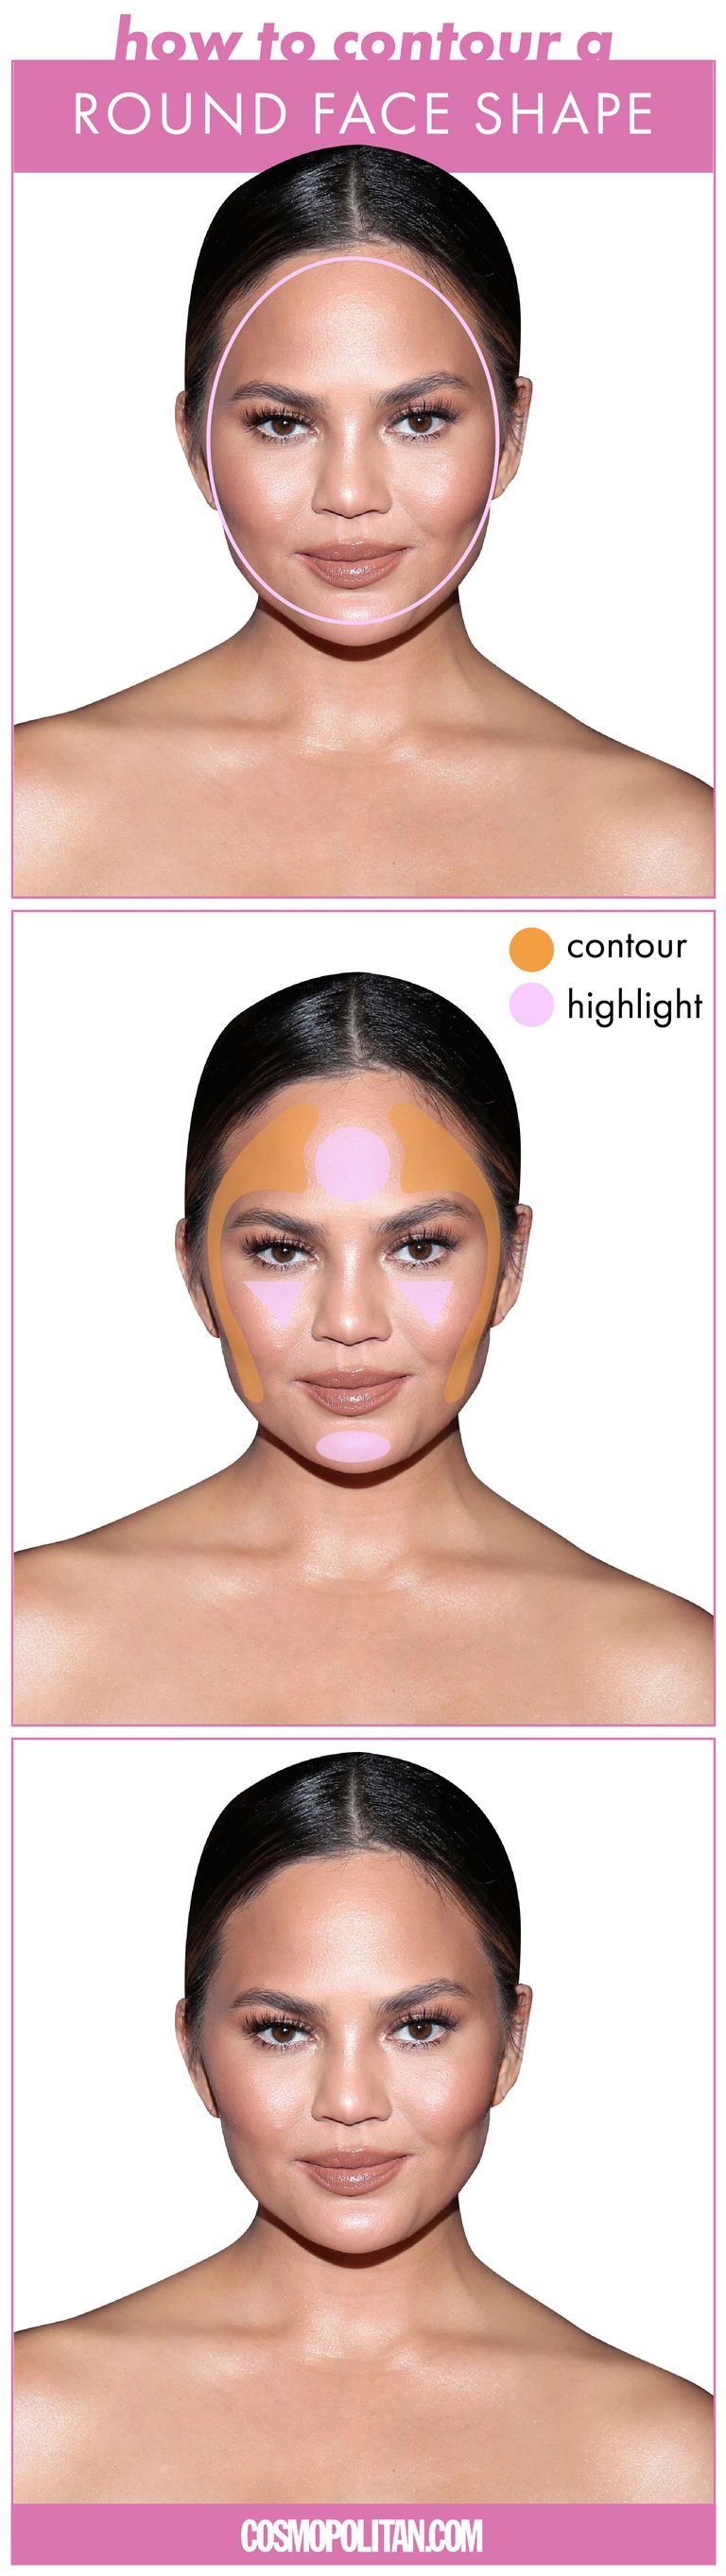 Exactly How To Contour And Highlight Based On Your Face Shape Beauty Homepage Cosmopolitan Middle East